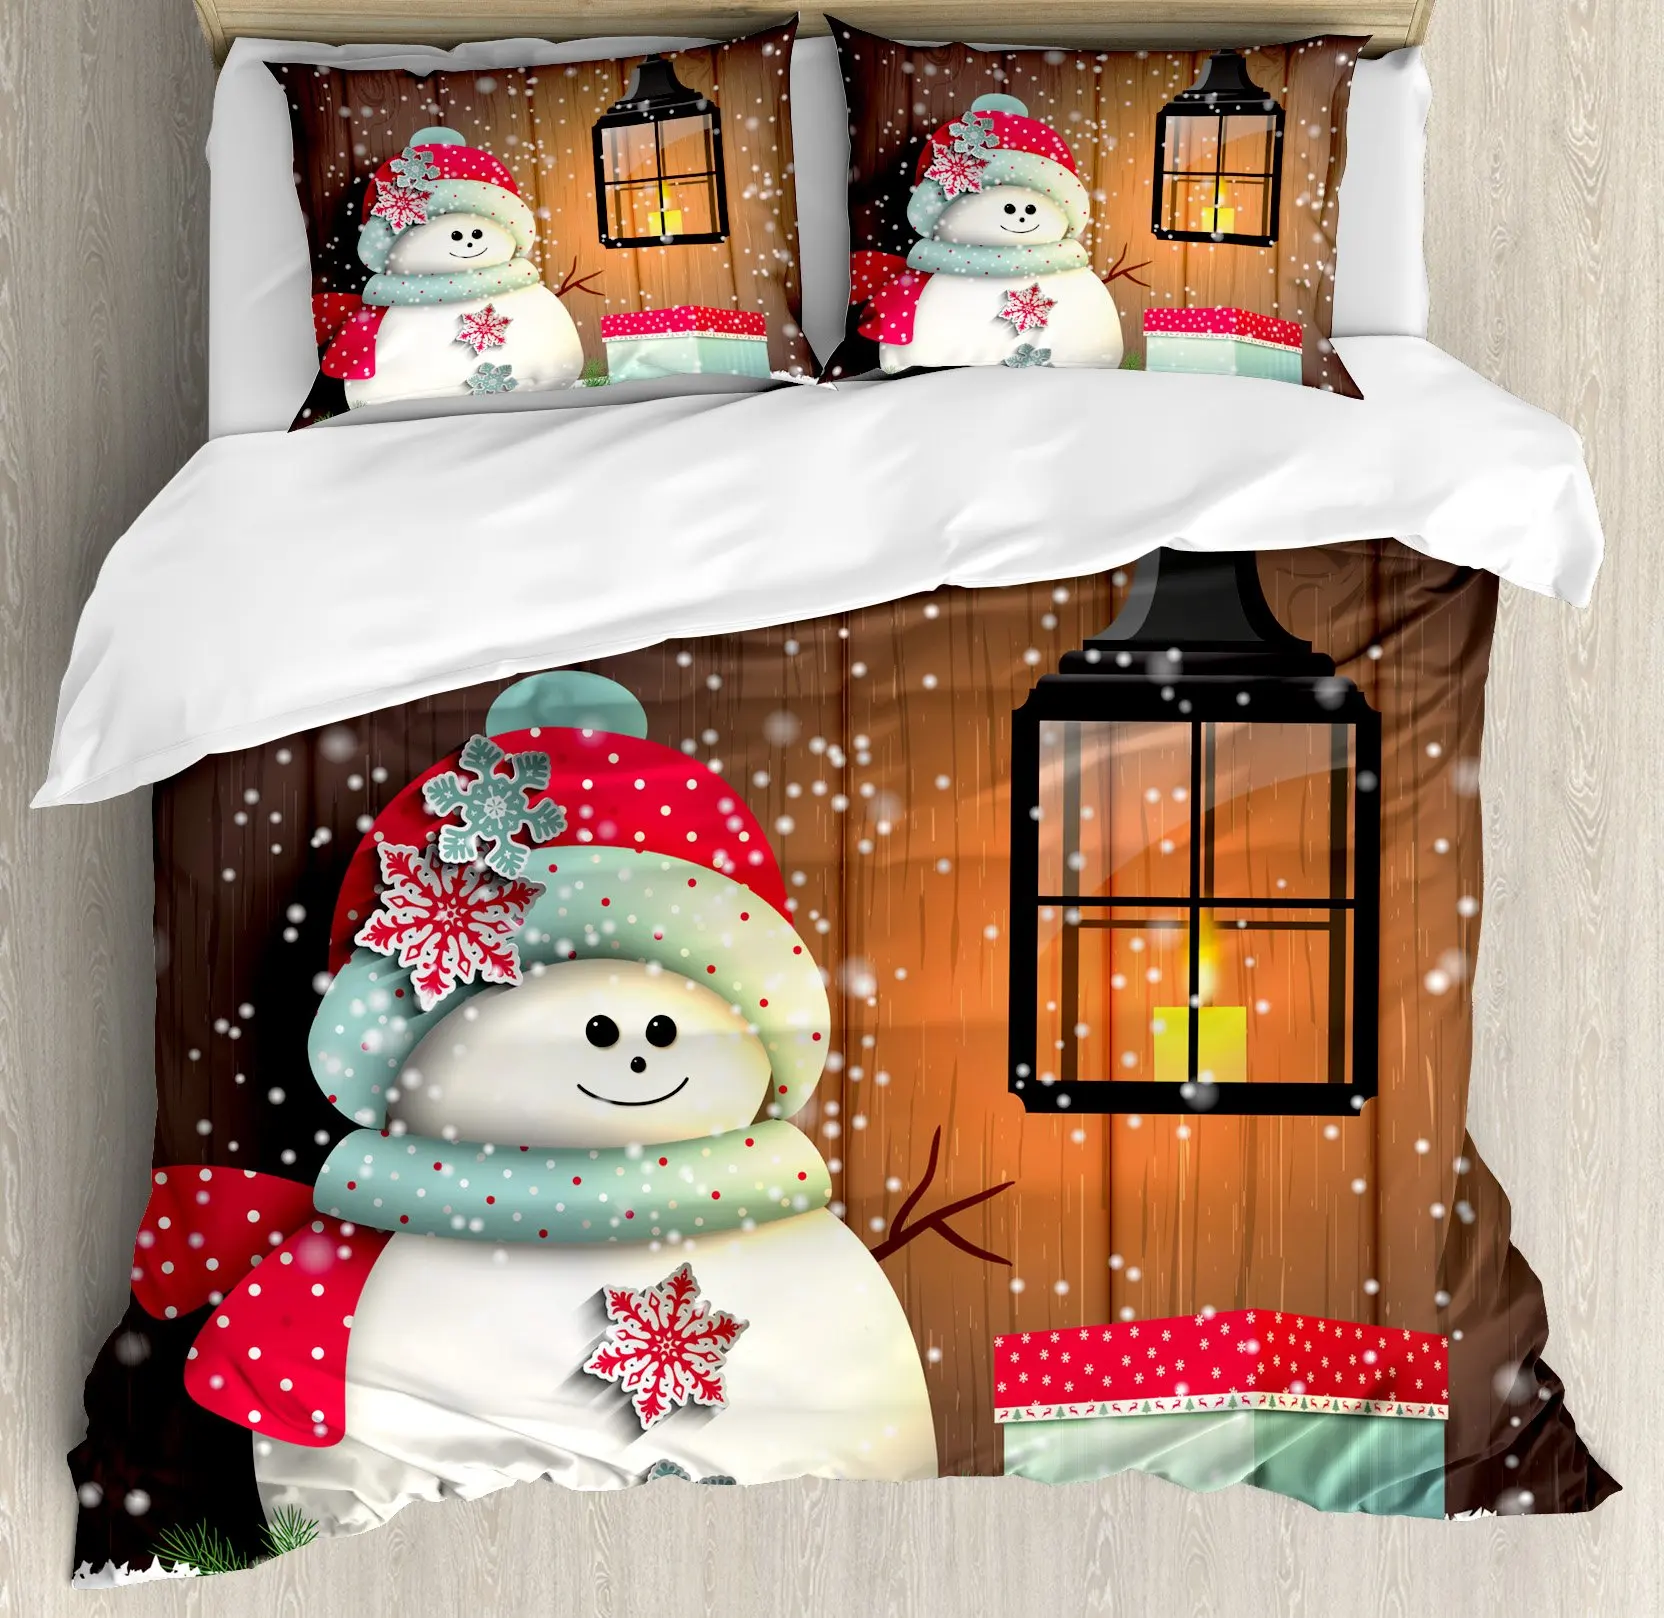 Christmas Duvet Cover Set, Snowman with Santa Hat In The Garden with A Gift Box and Candle Cartoon Image Polyester Bedding Set